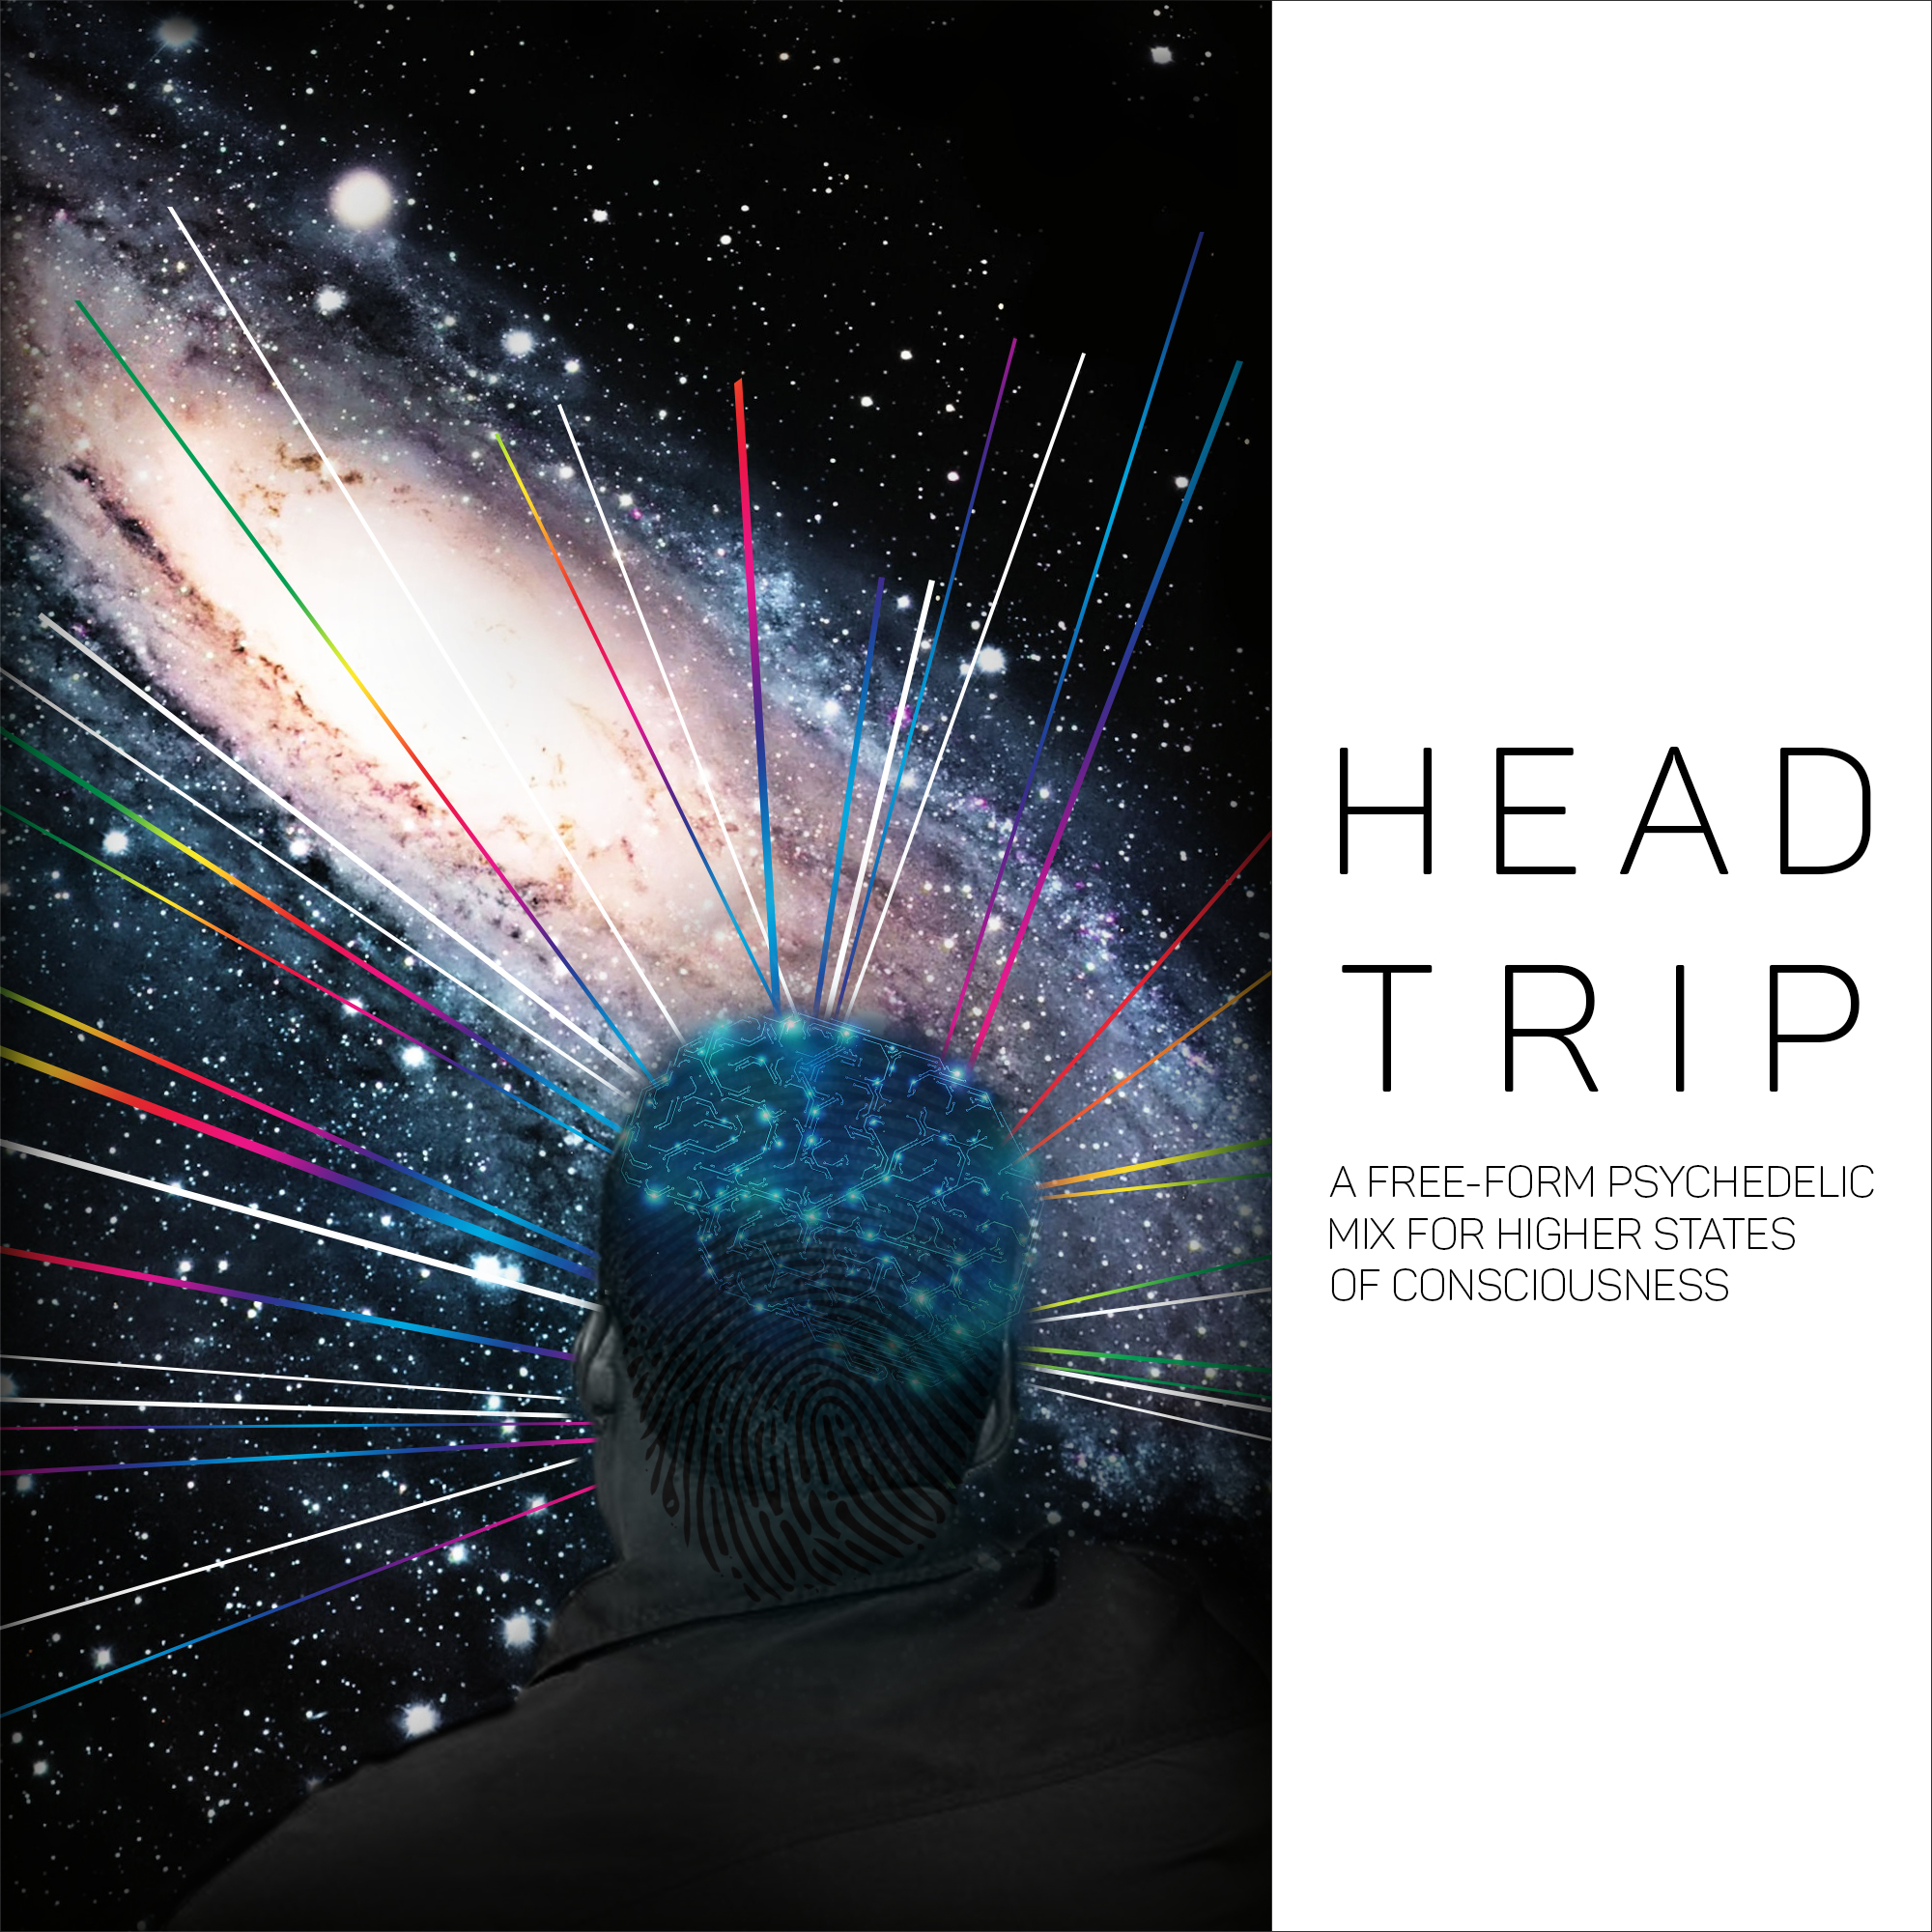 Head Trip: A Free-Form, Psychedelic Mix for higher states of conconsciousness.